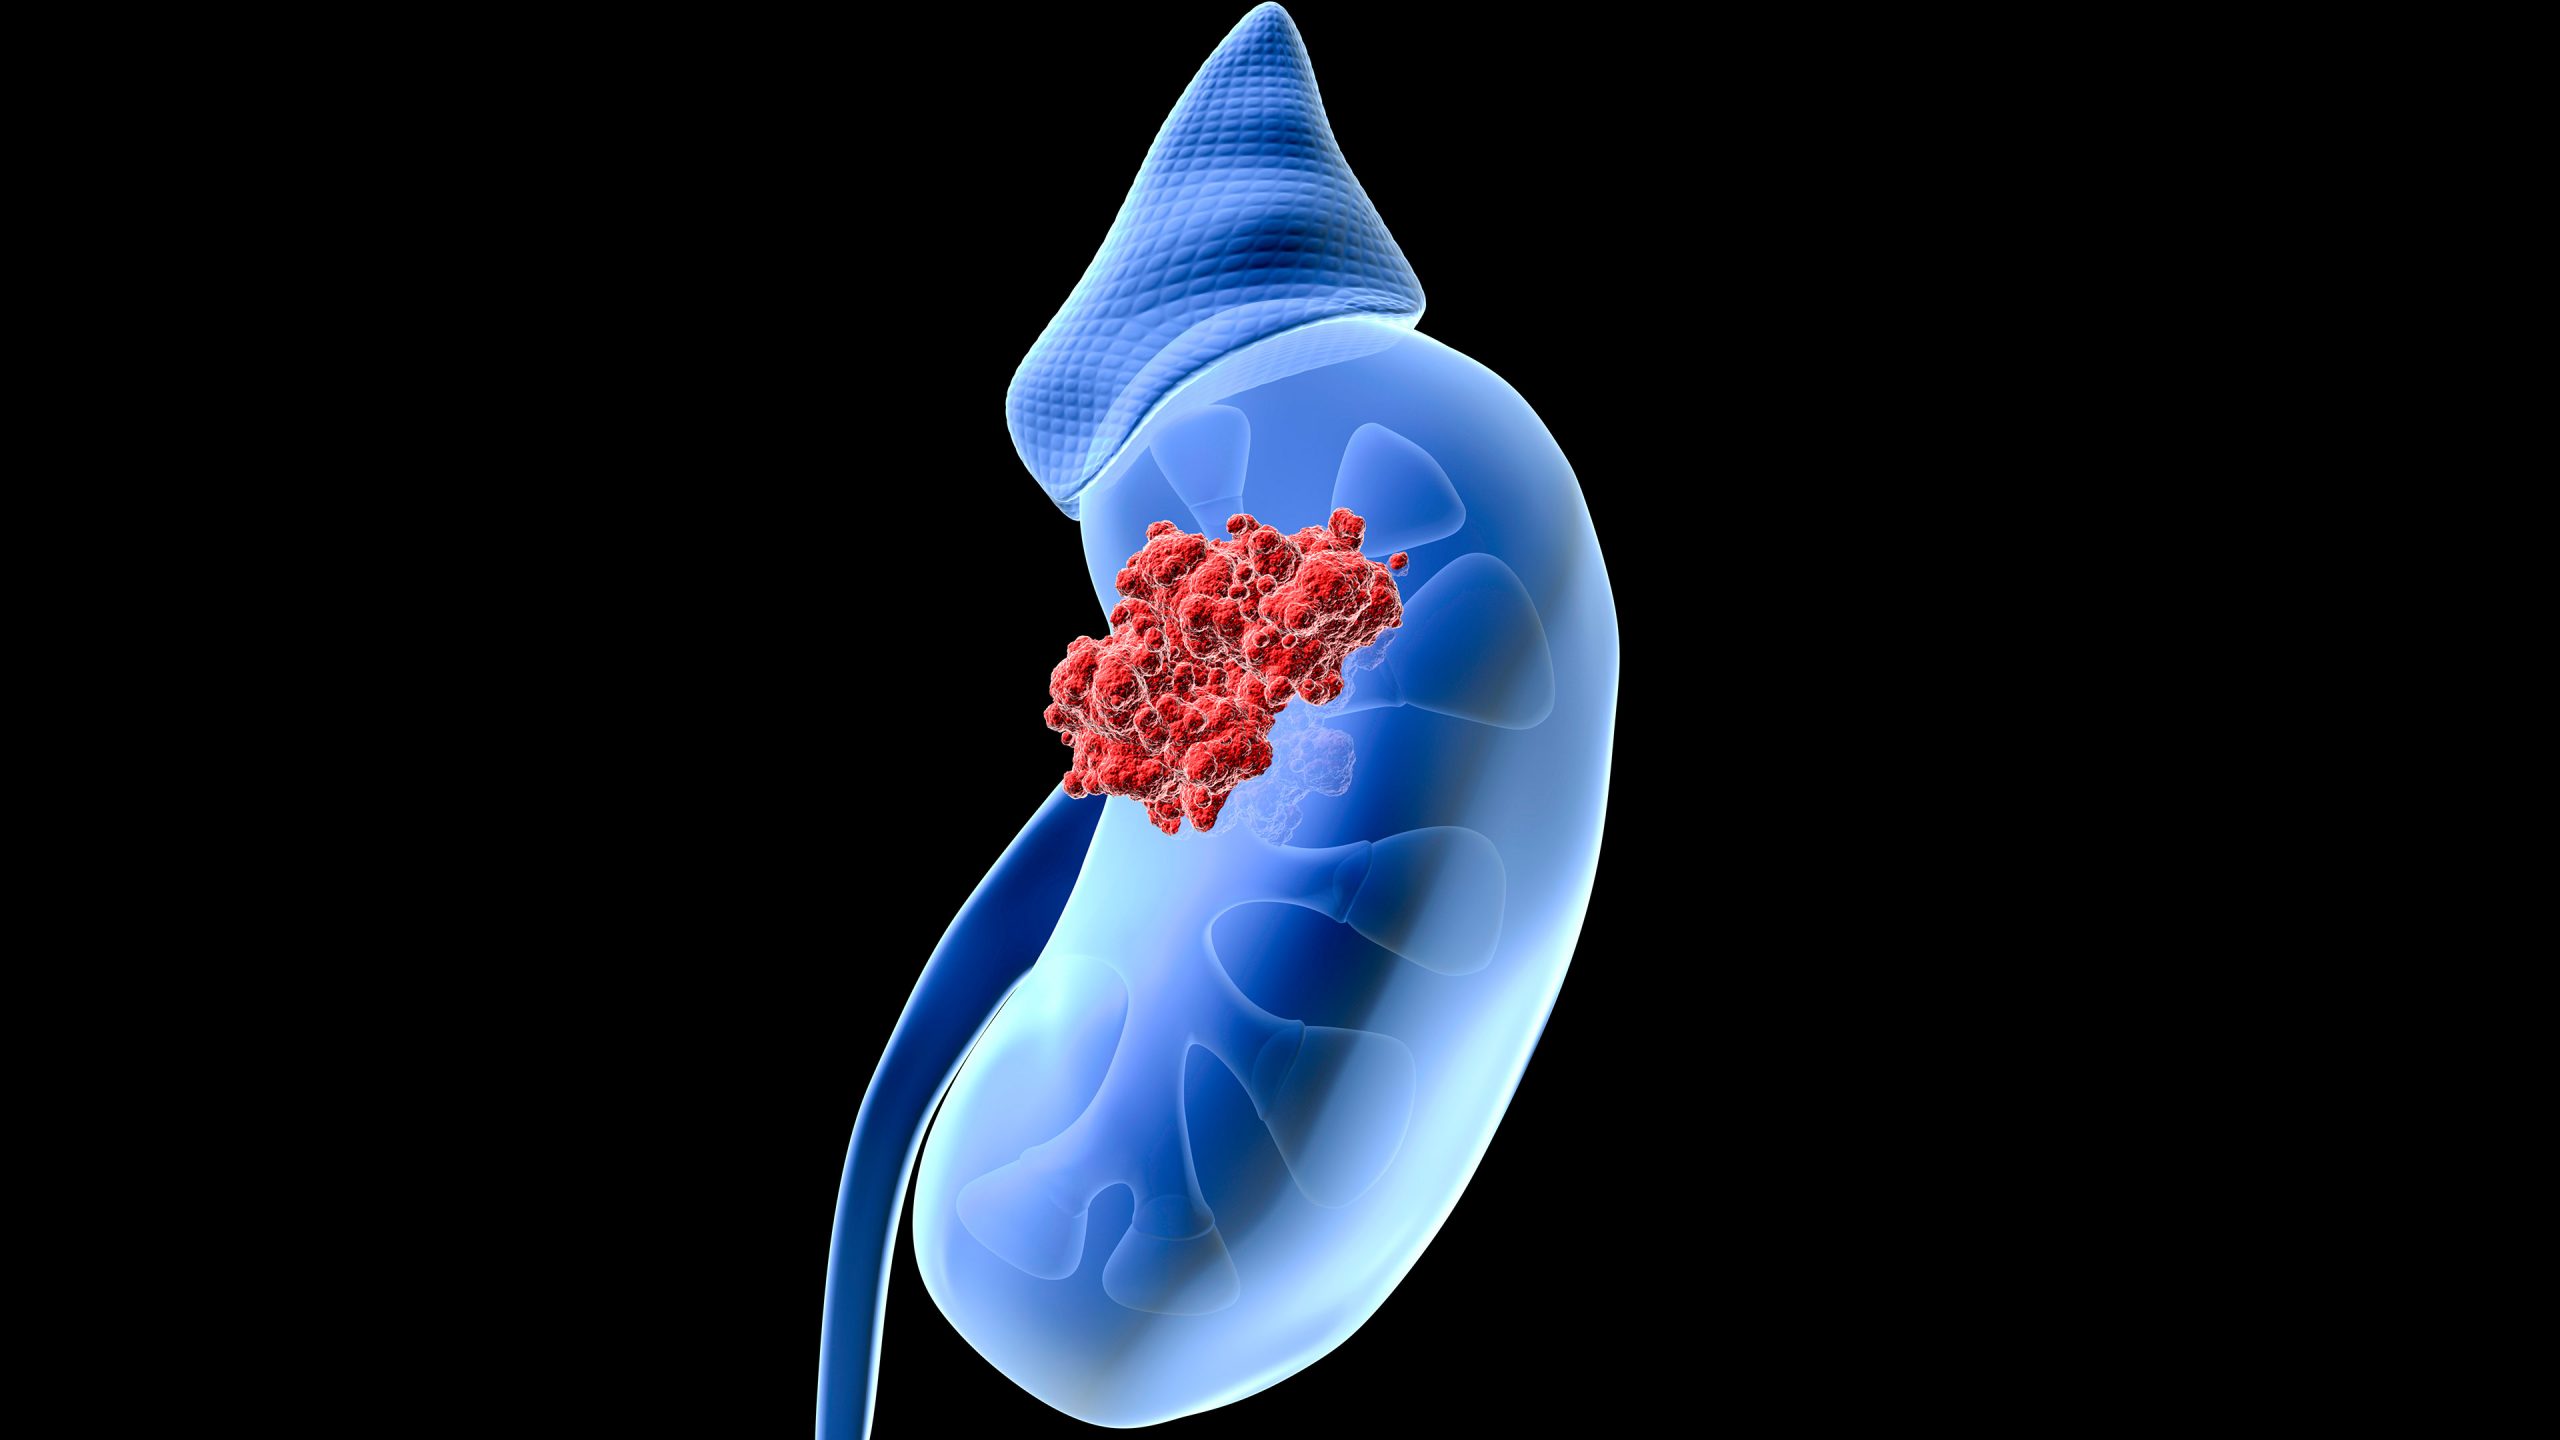 Kidney cancer: symptoms, types, diagnosis and treatment